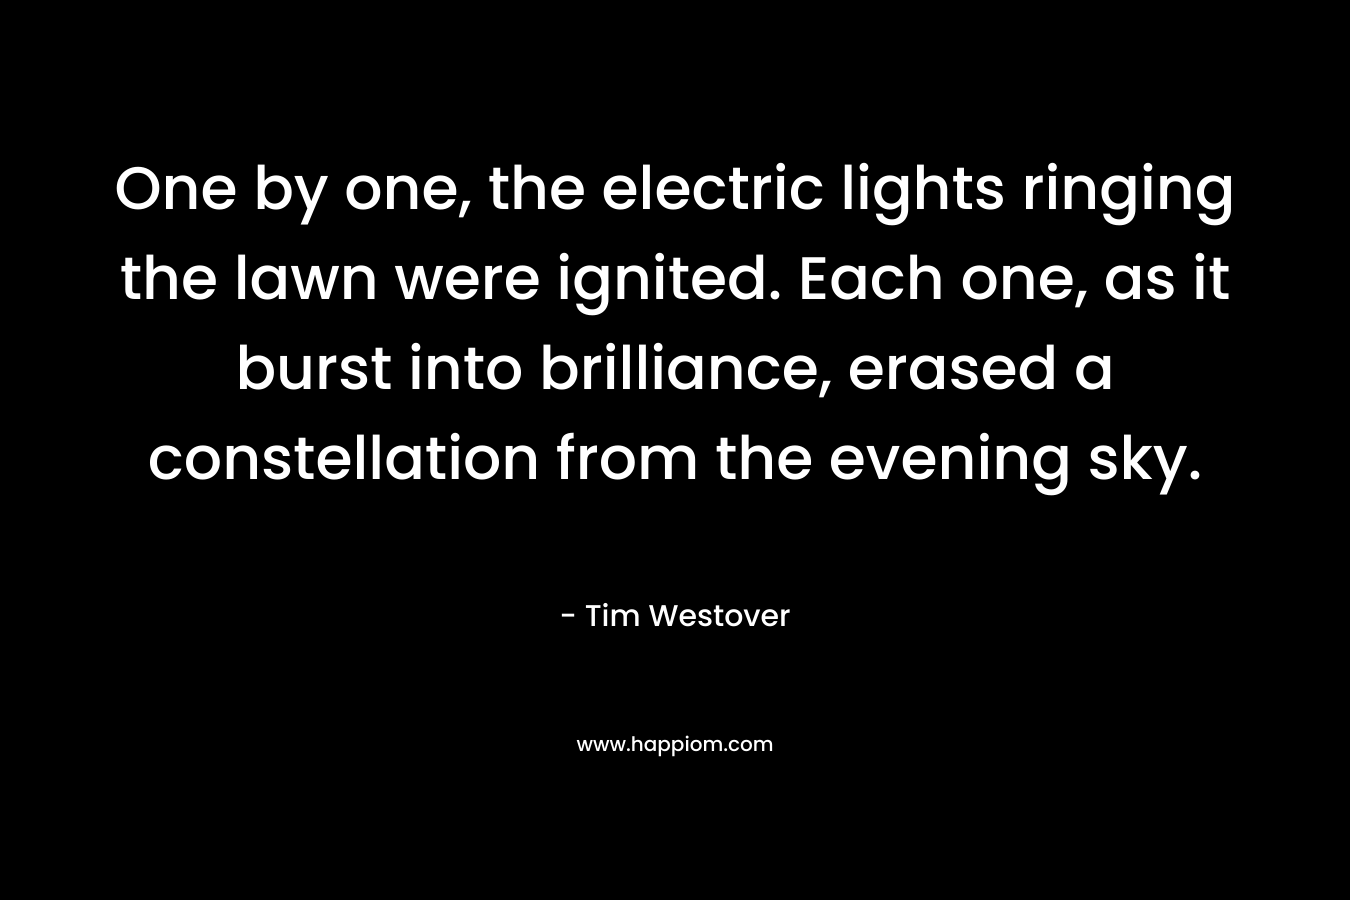 One by one, the electric lights ringing the lawn were ignited. Each one, as it burst into brilliance, erased a constellation from the evening sky. – Tim Westover